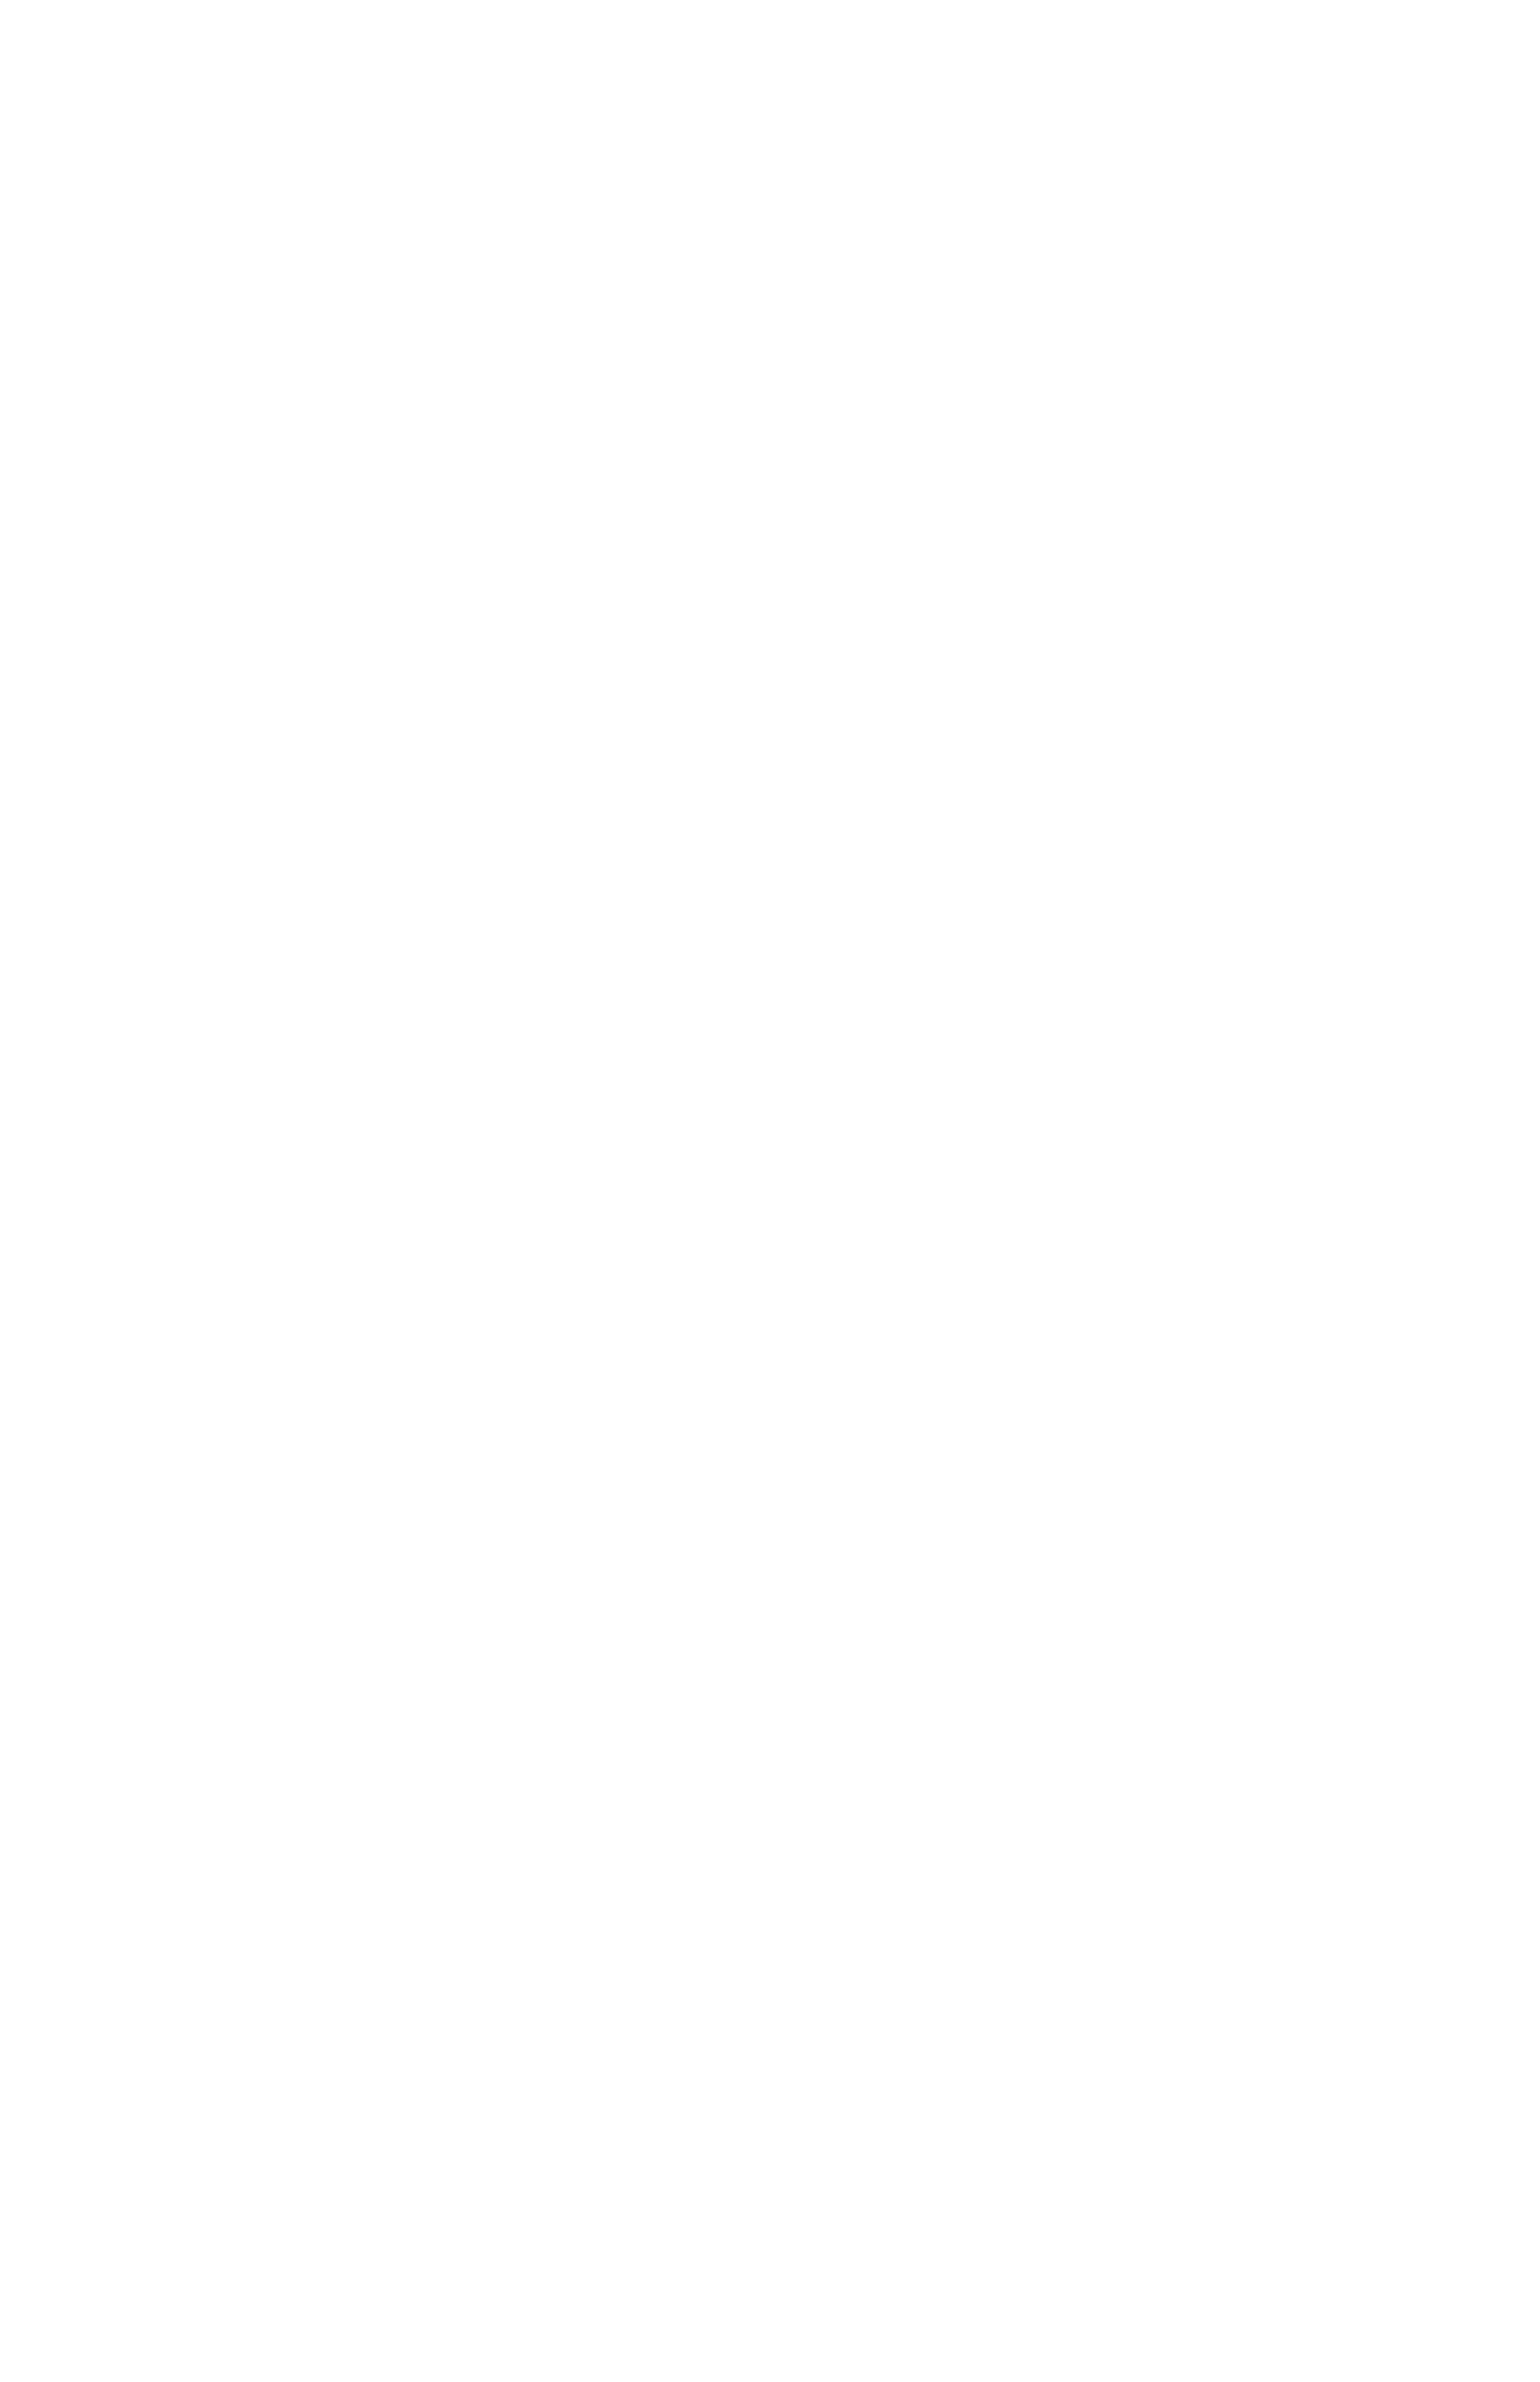 WE WERE MEANT TO